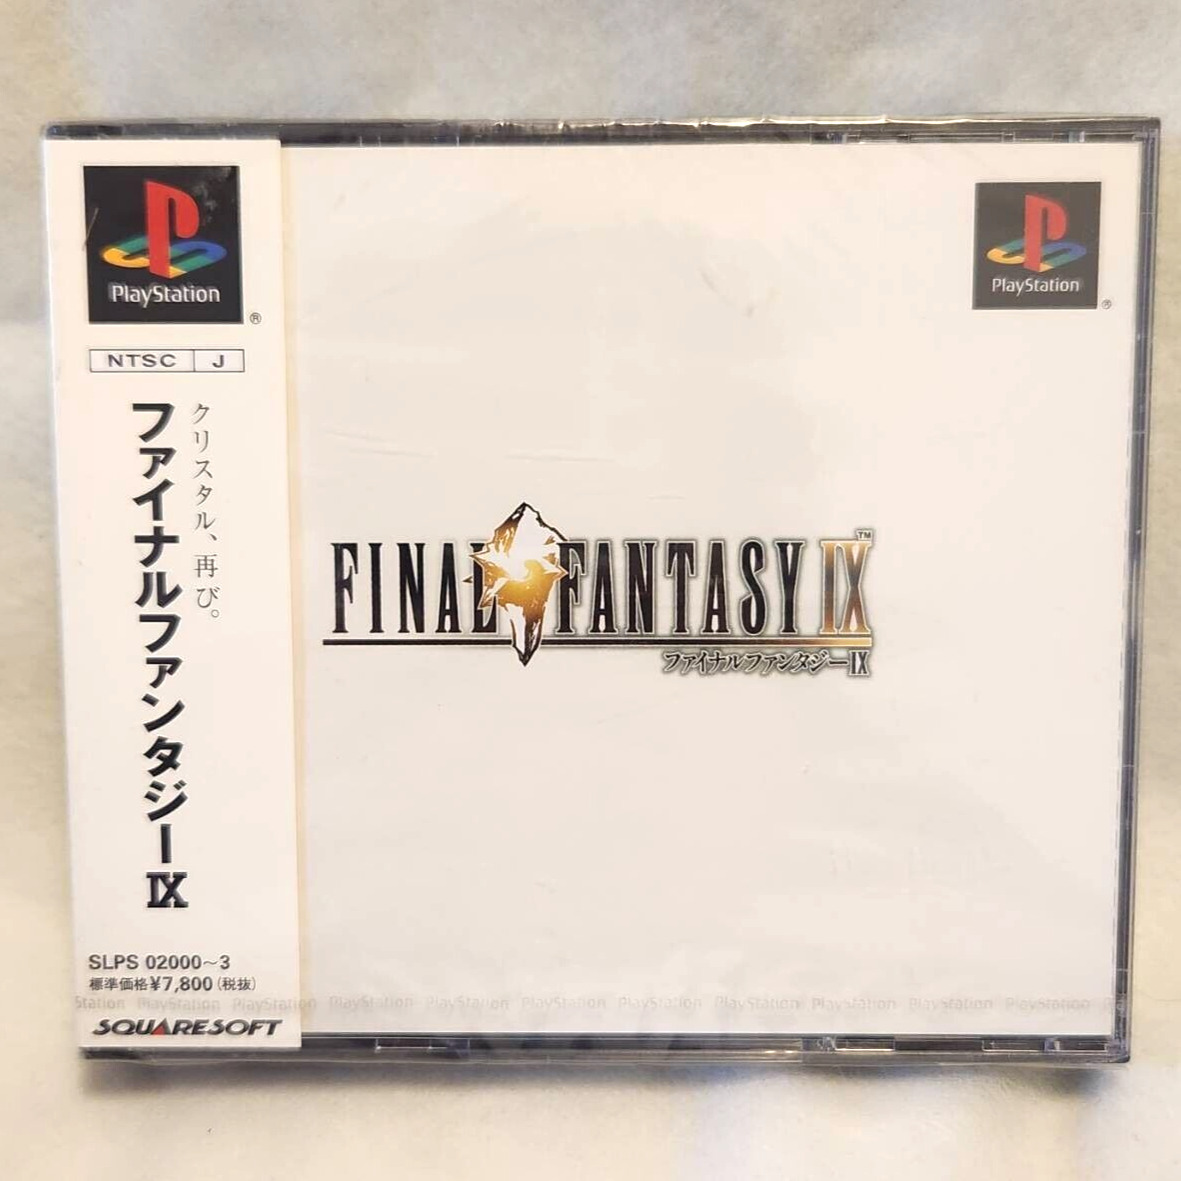 Final Fantasy IX FF 9 SEALED FOR Sony PS1 Playstation Game Soft New Old Stock